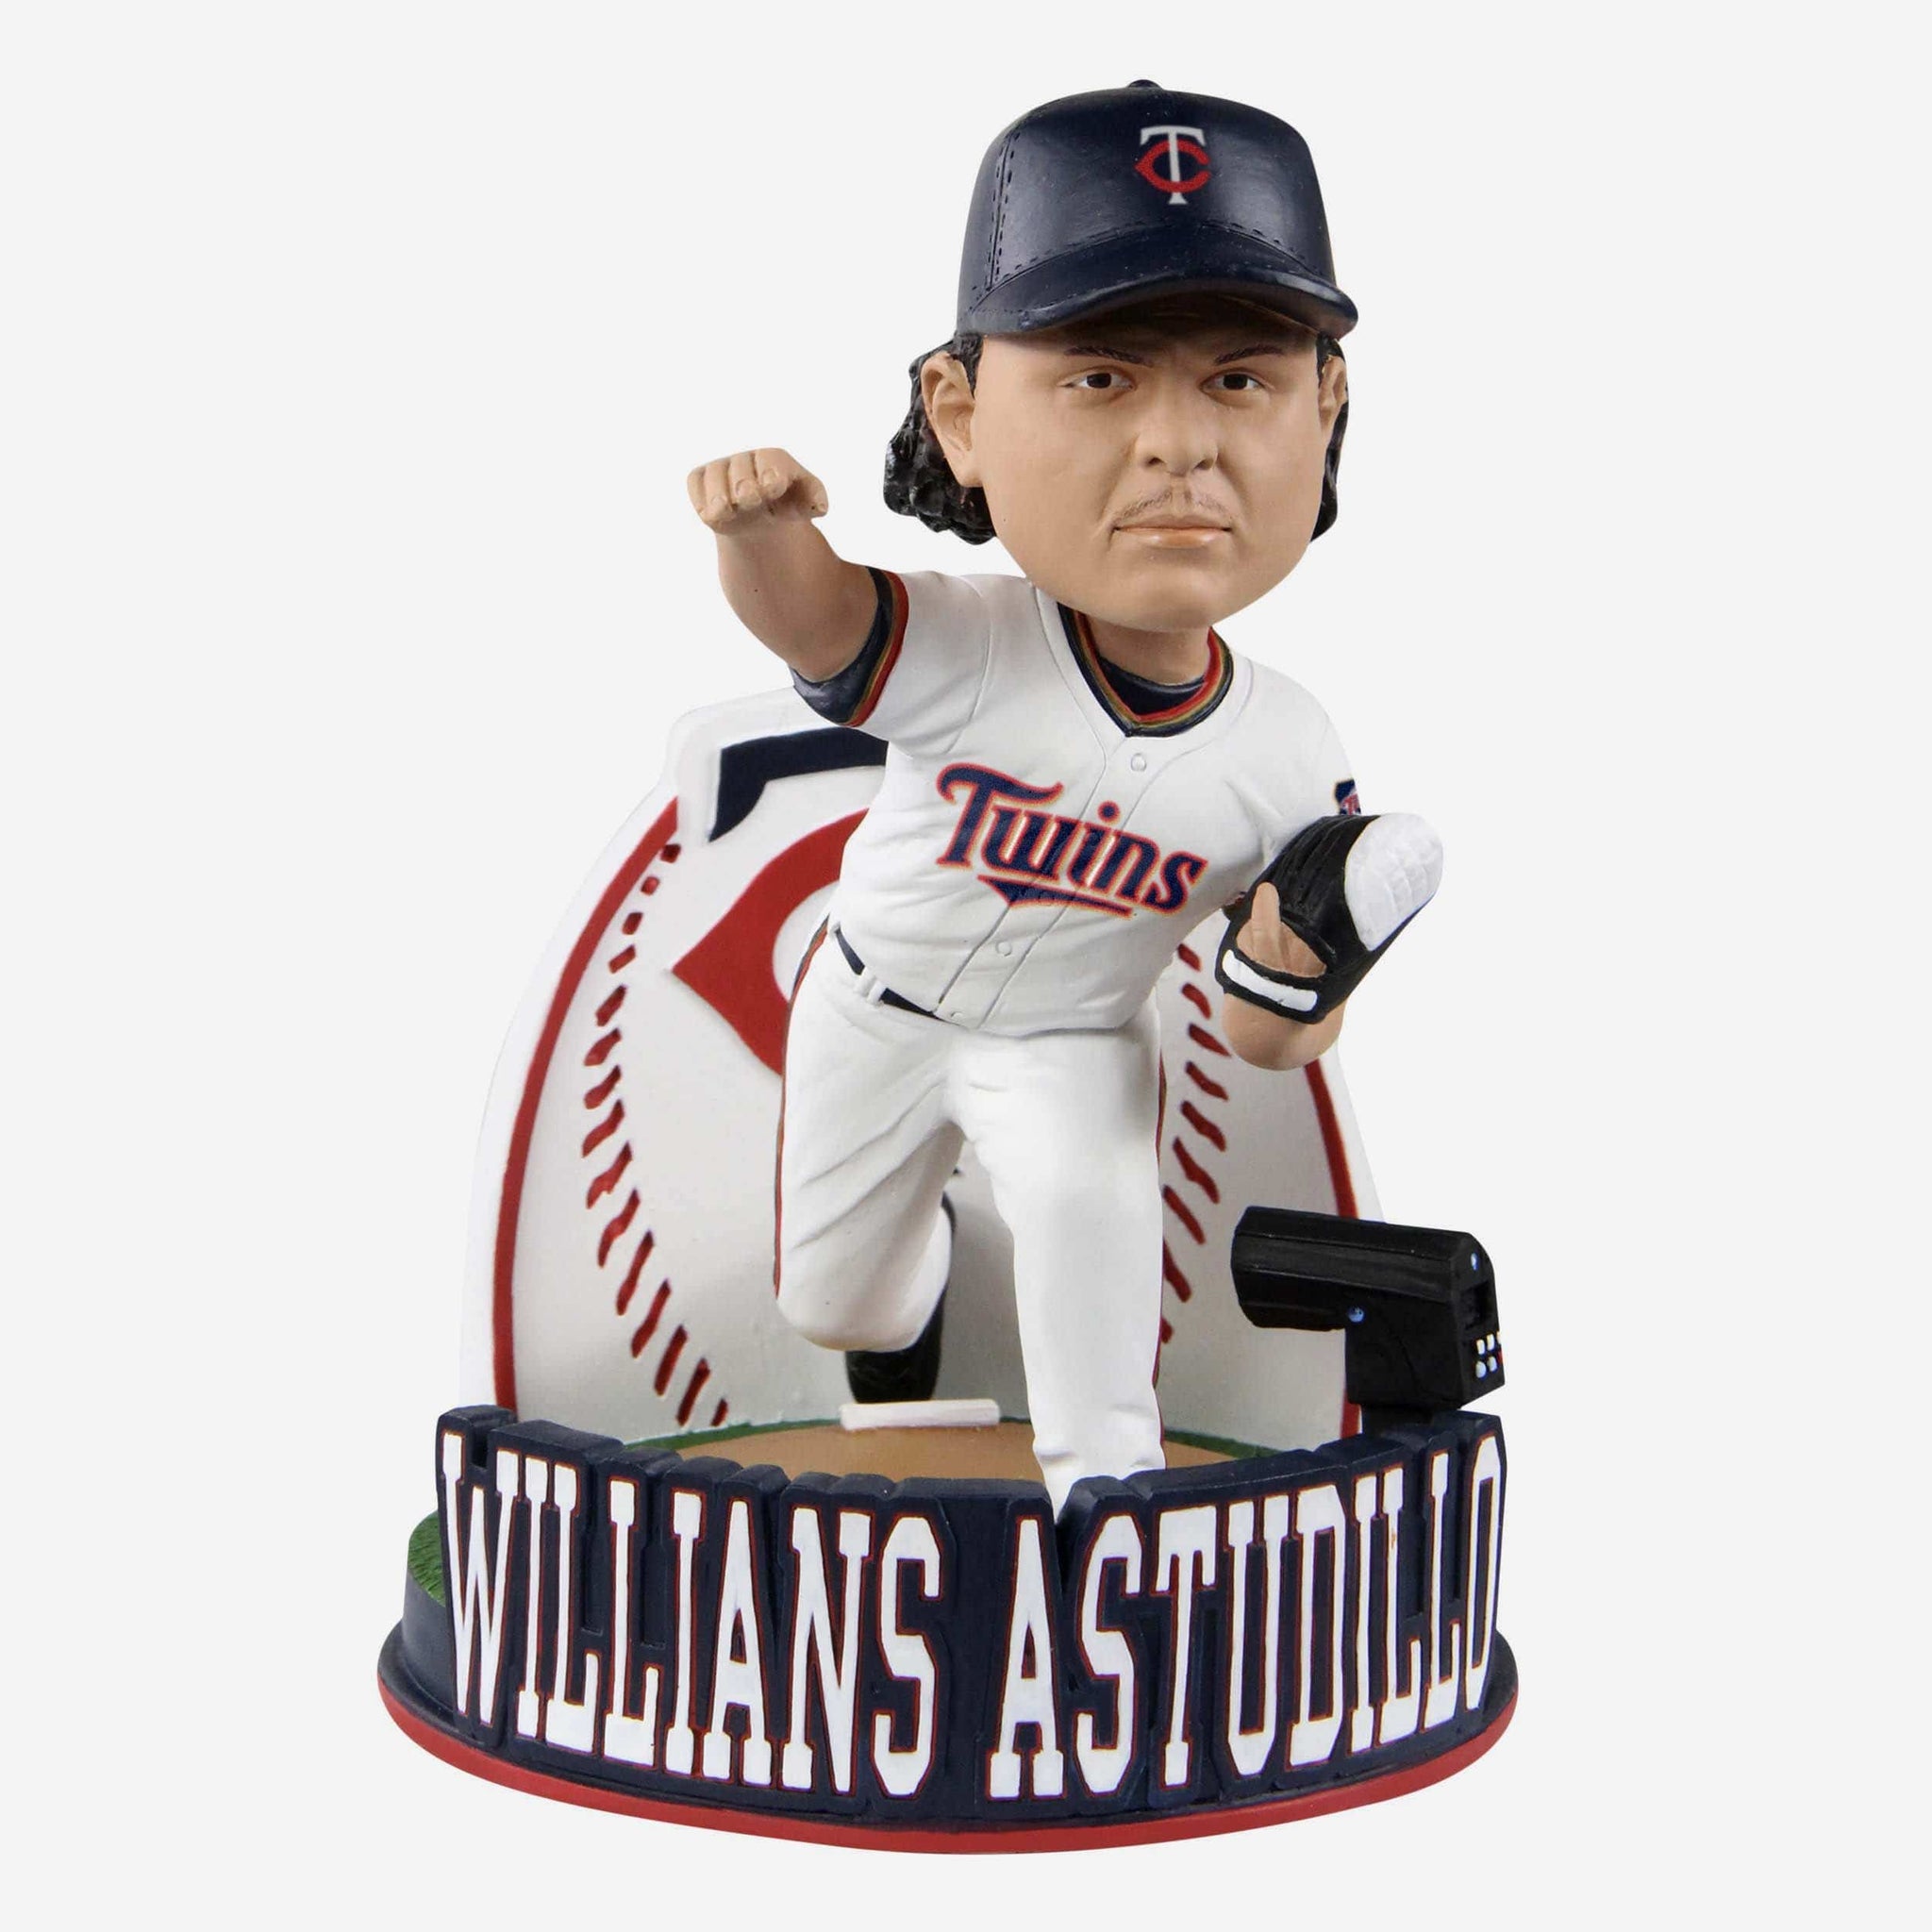 HE'S BACK! Willians Astudillo gets another pitching appearance